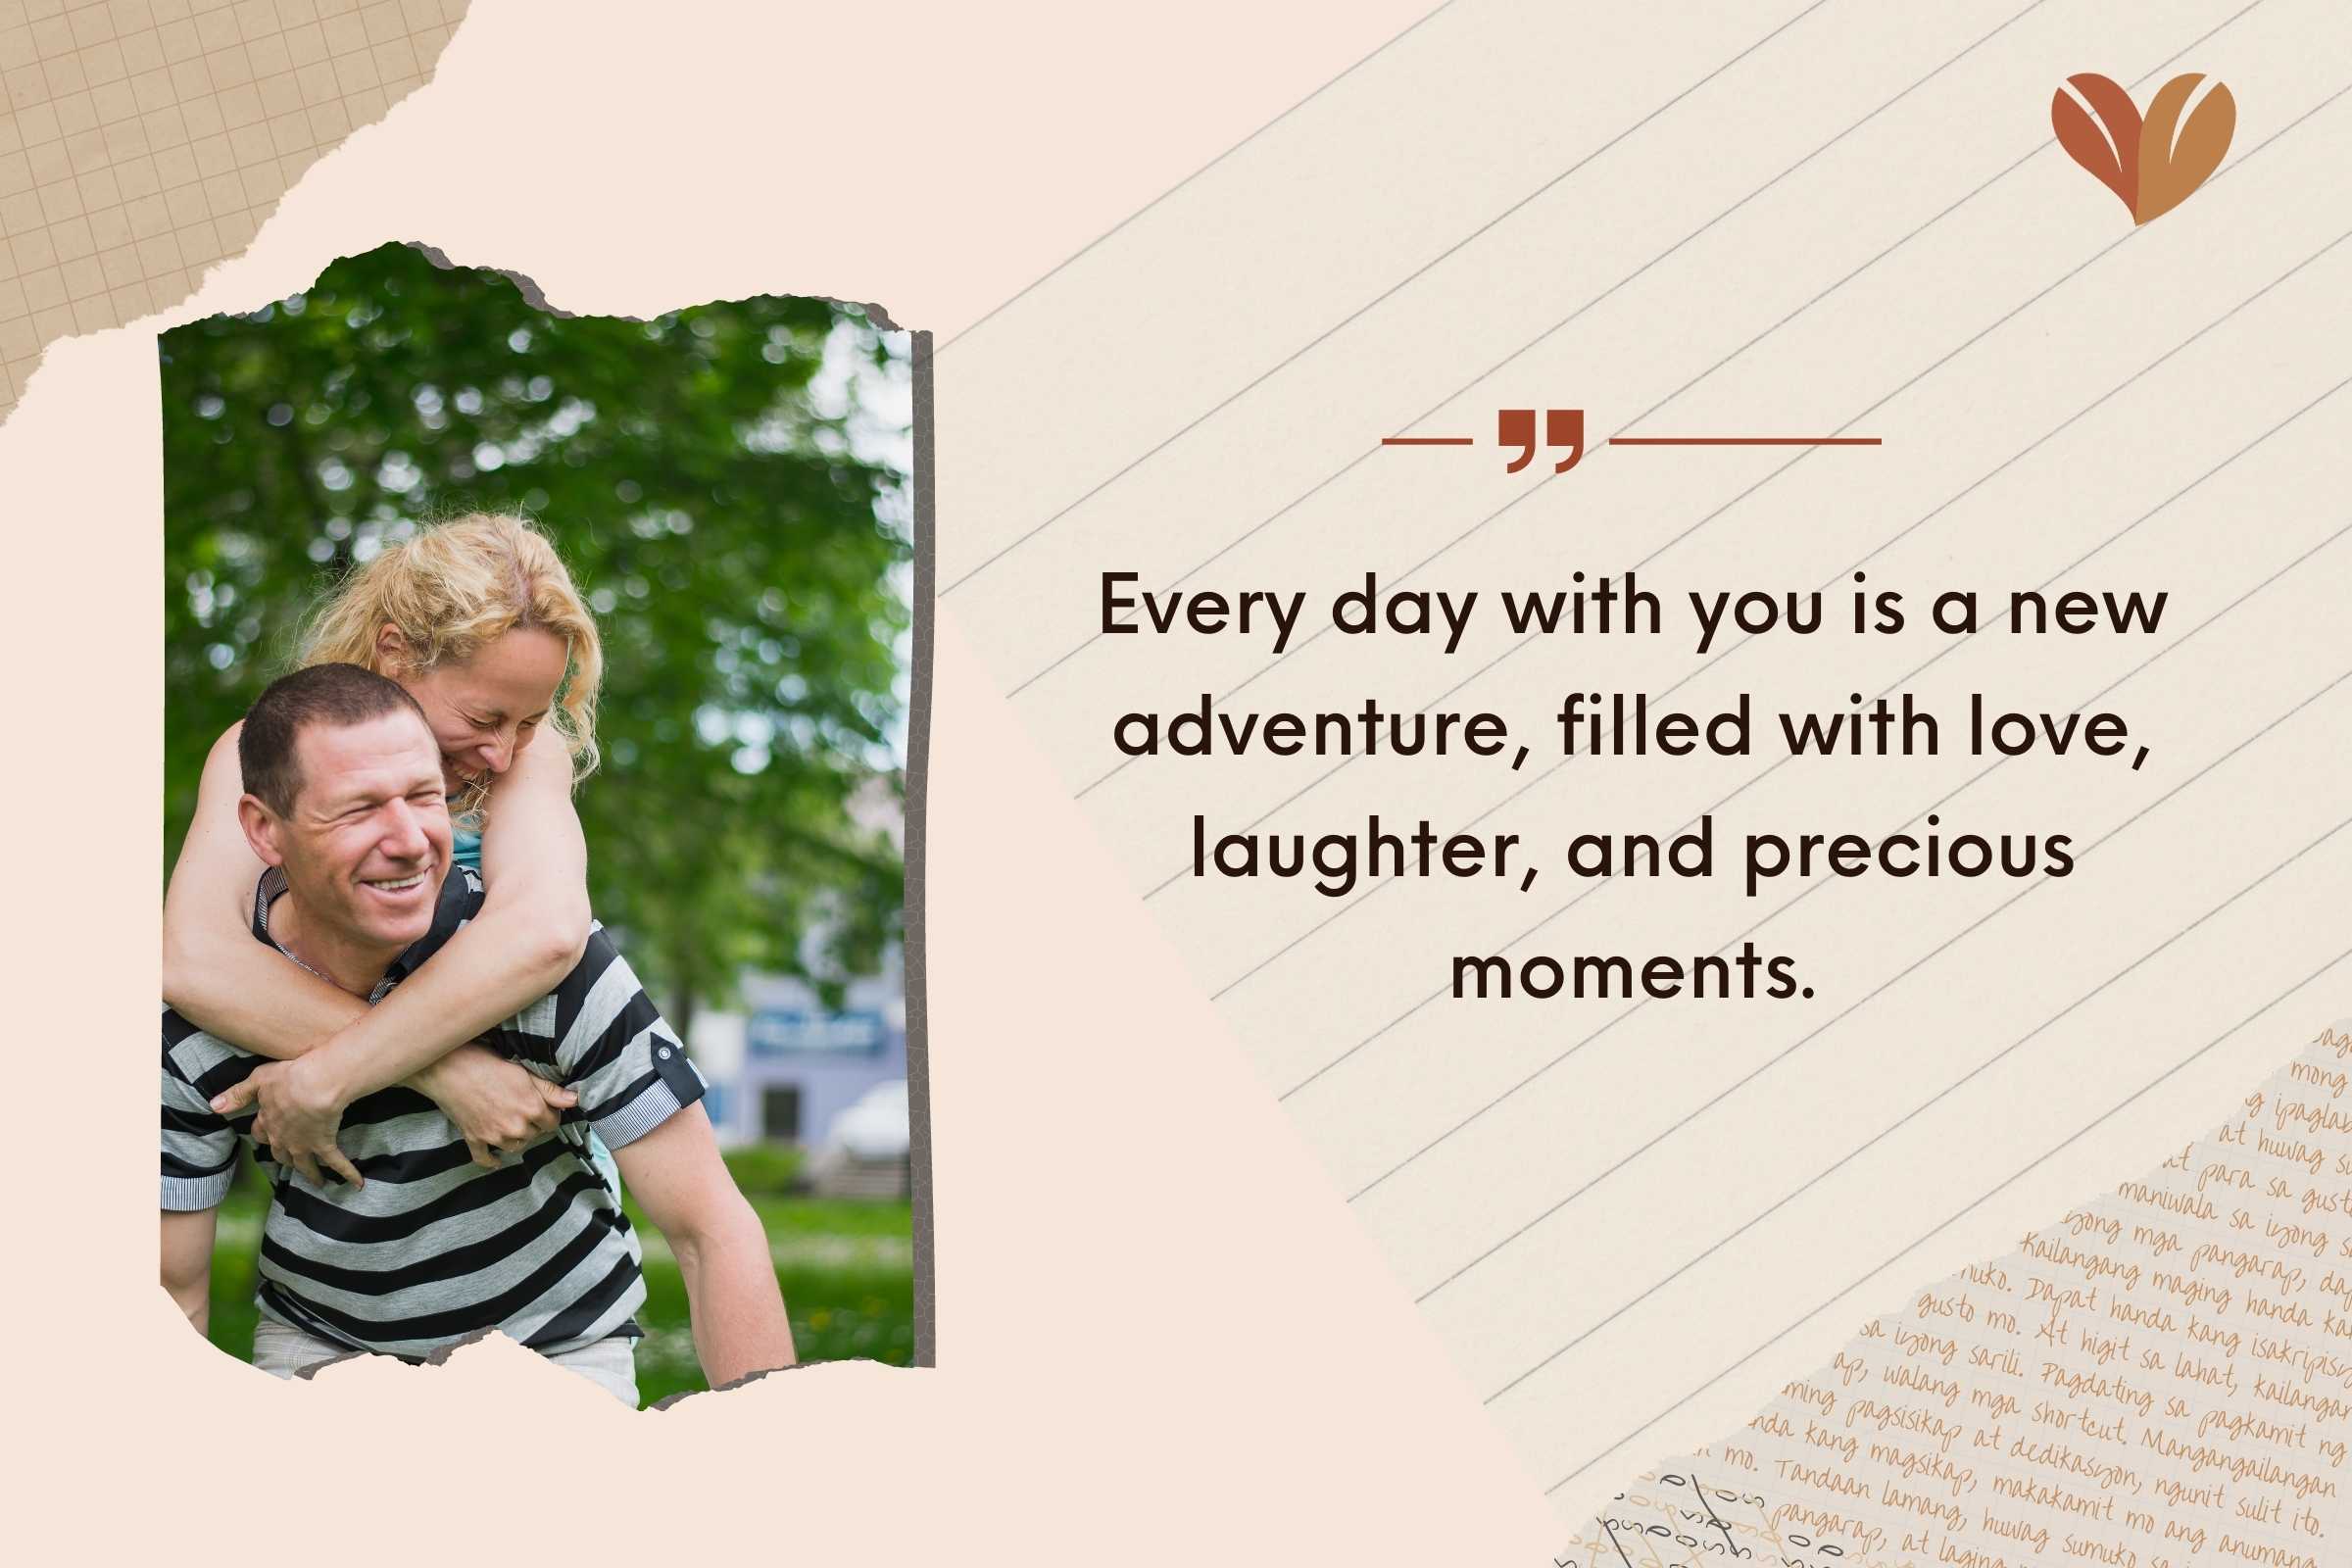 Honor your love with these touching anniversary saying quotes.